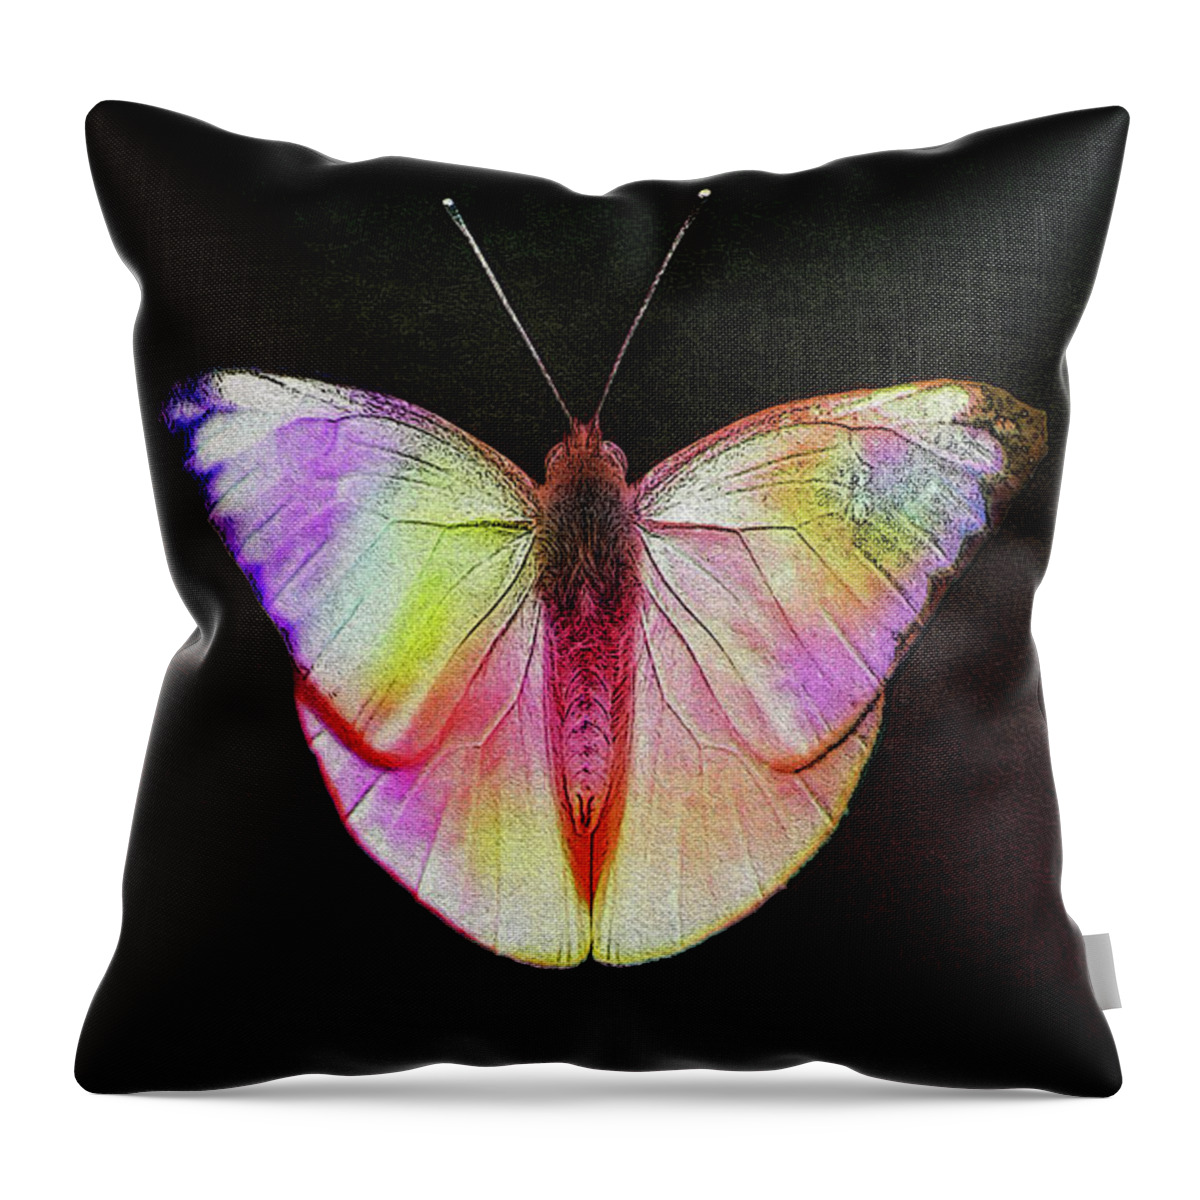 Butterfly Throw Pillow featuring the digital art Butterfly In Retro by Manjot Singh Sachdeva